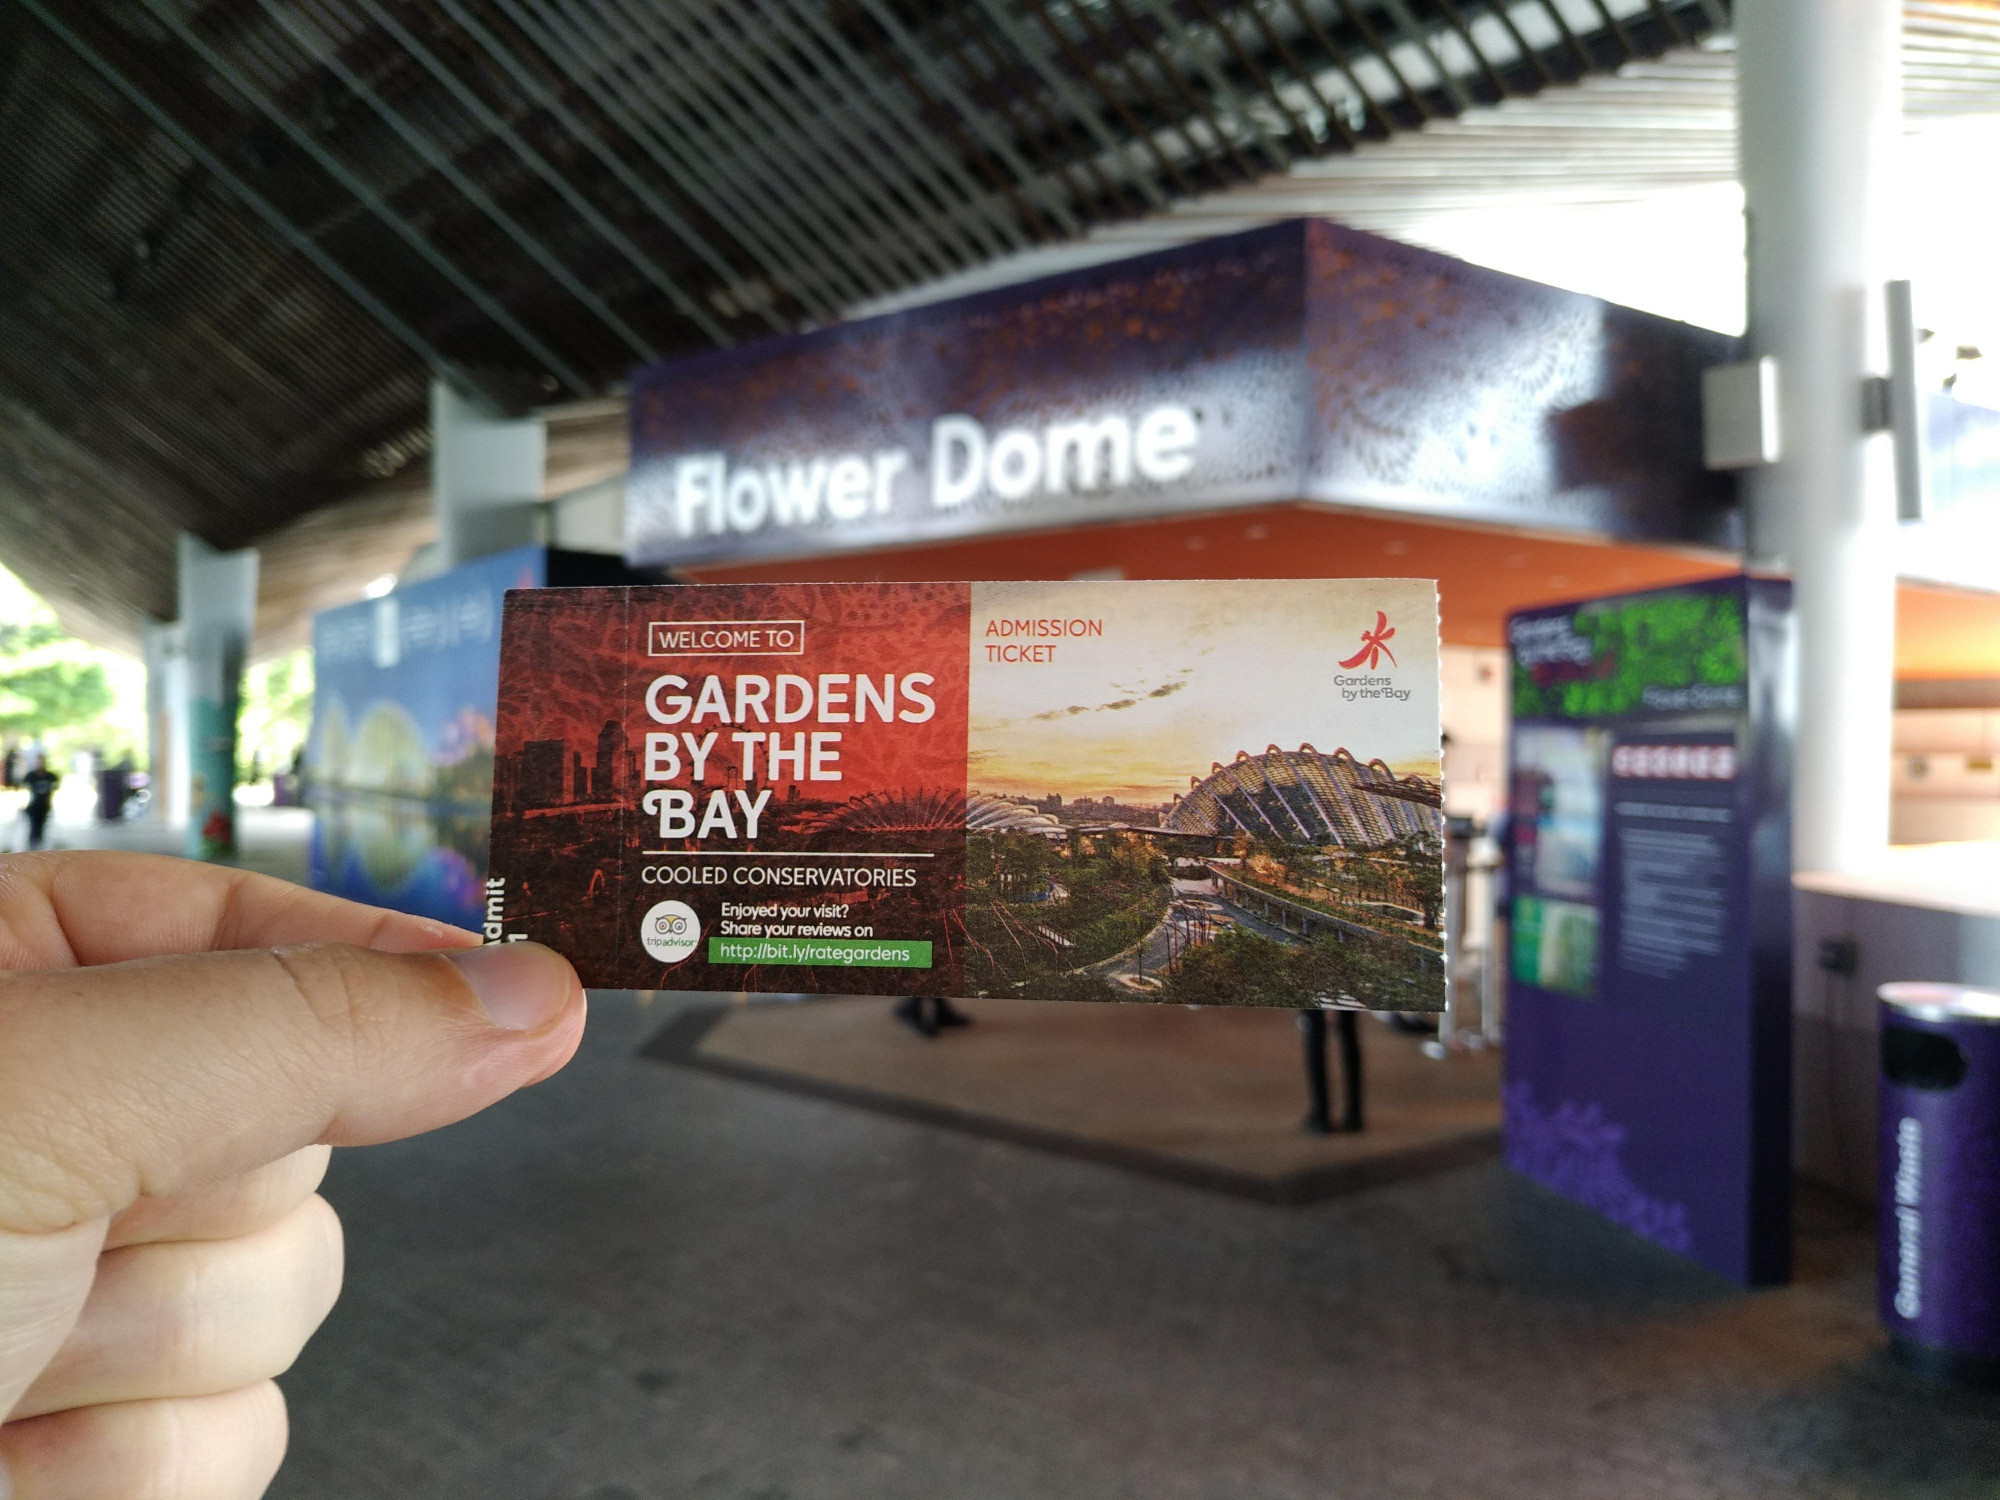 ticket to the Gardens by the Bay (Singapore)